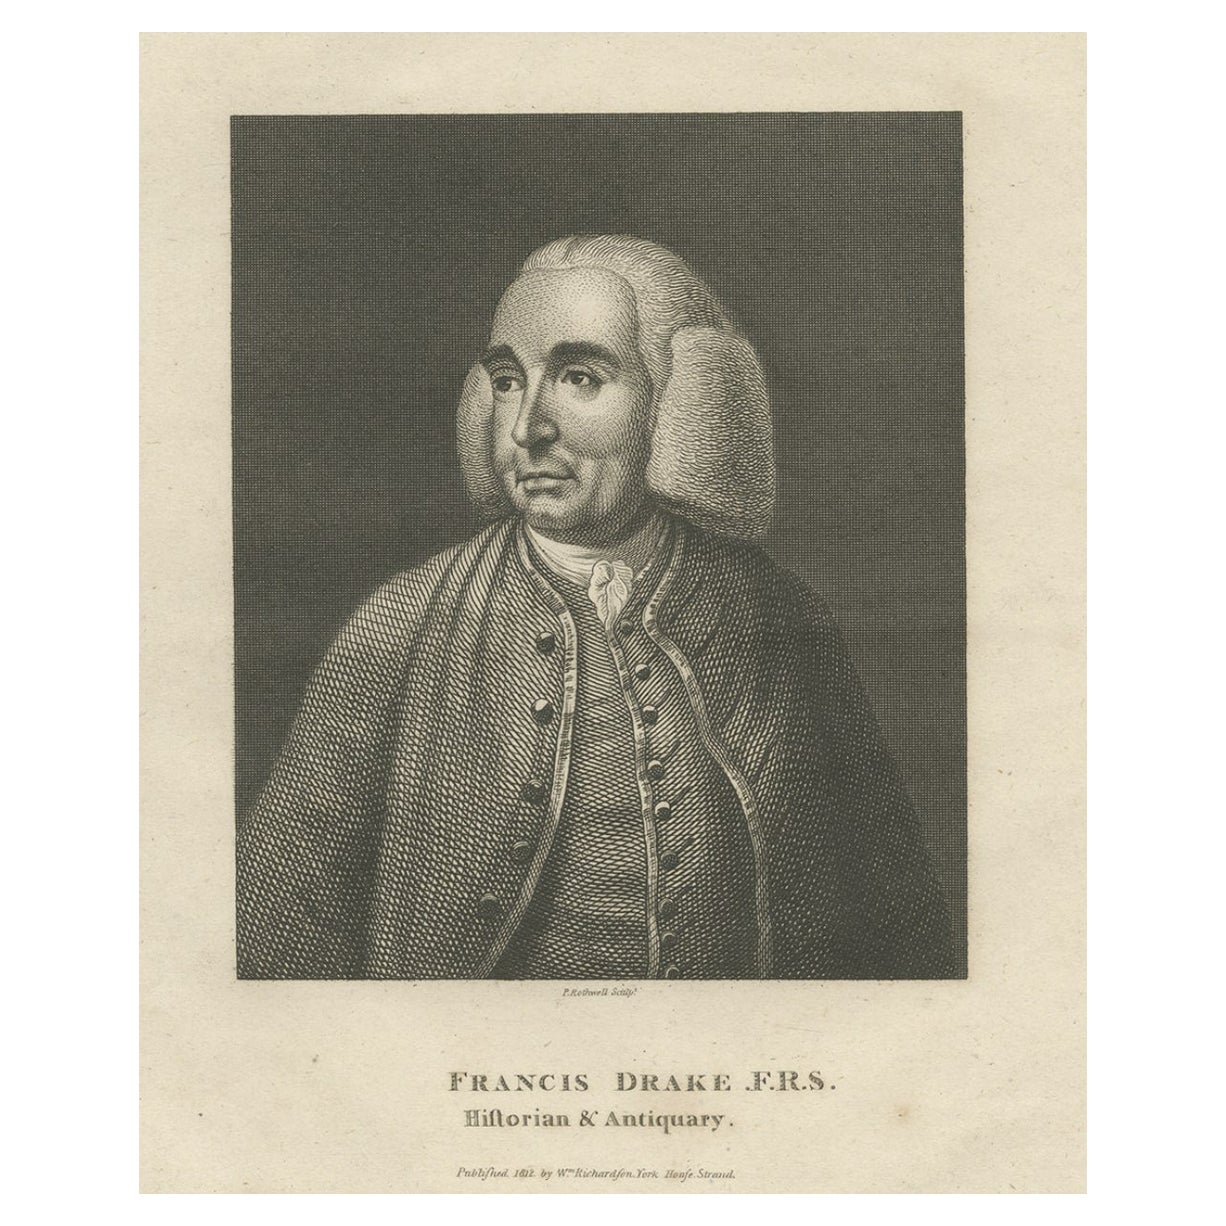 Old Print of Francis Drake, an English Antiquary and Surgeon, 1812